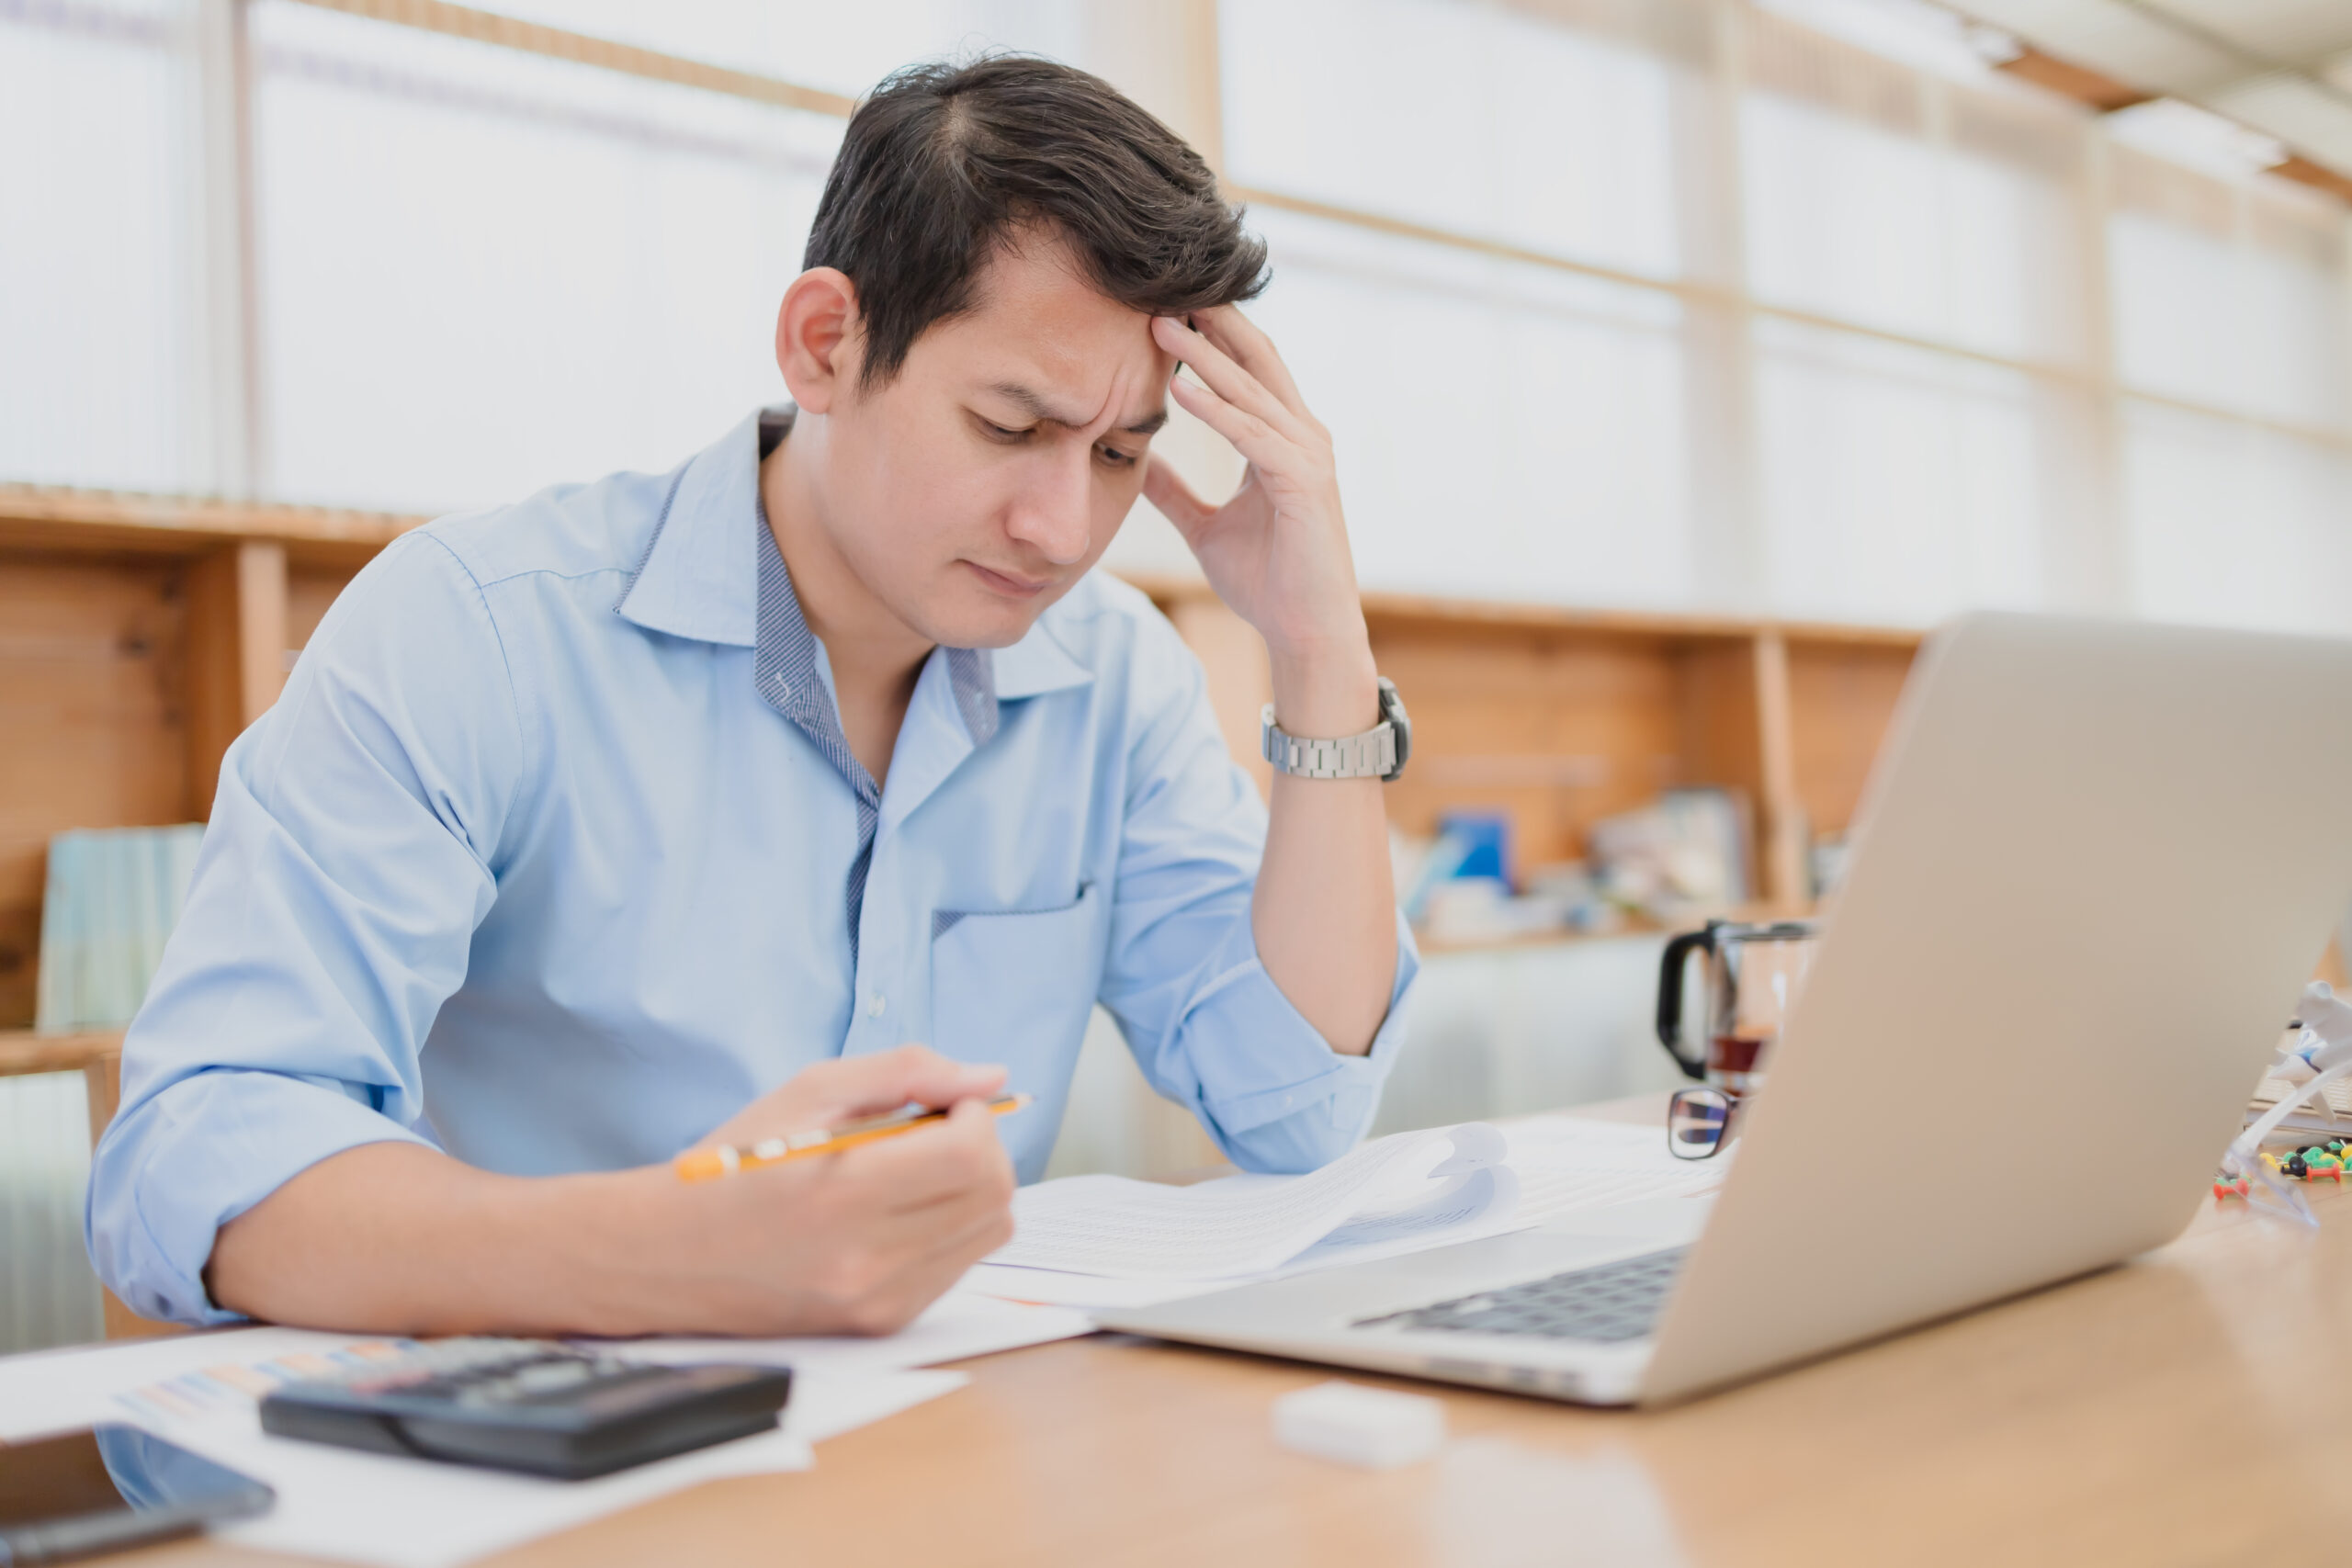 Bookkeeping Mistakes to Avoid